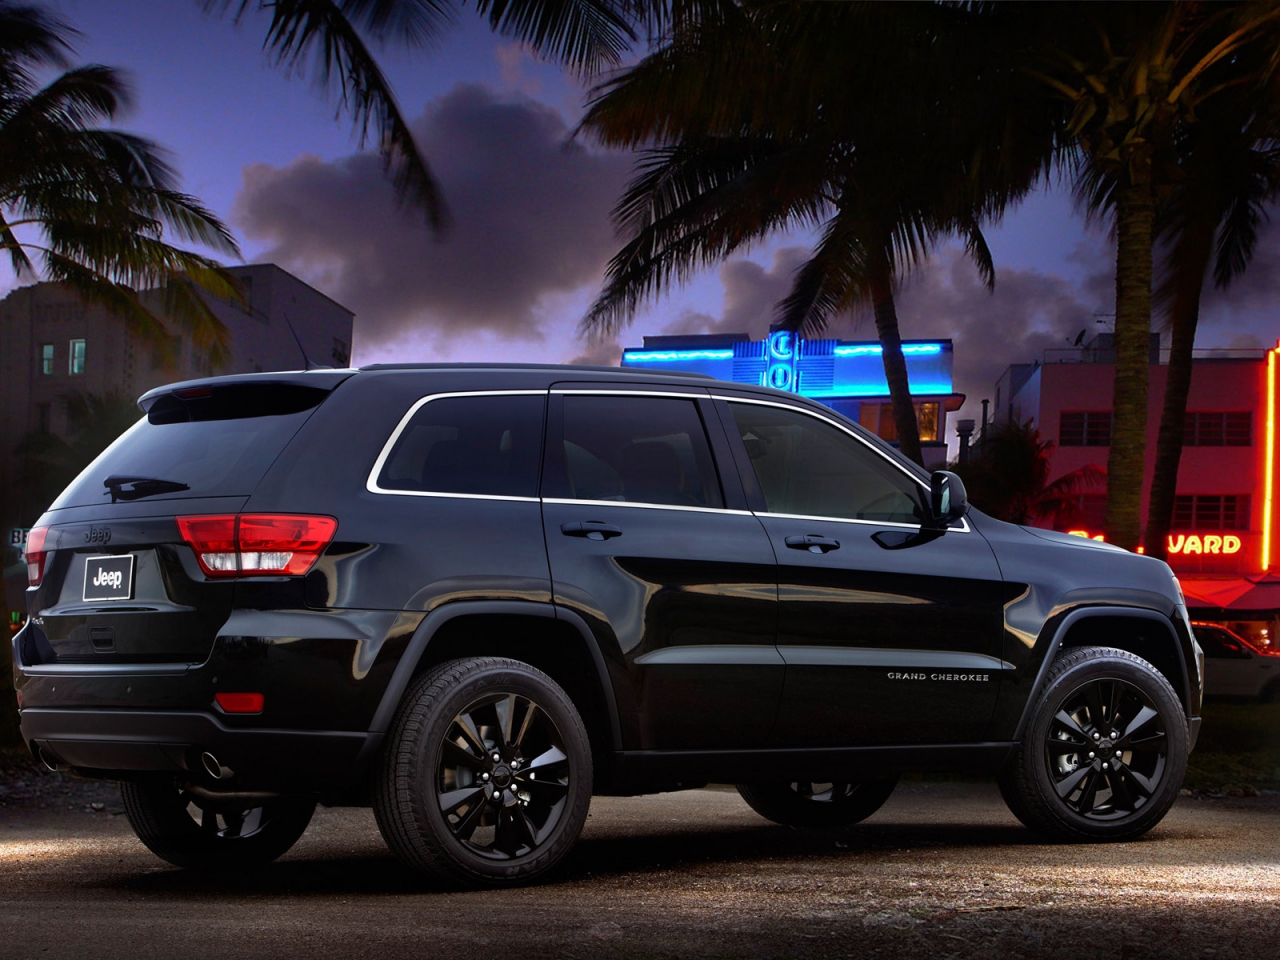 Jeep Grand Cherokee Rear Concept for 1280 x 960 resolution